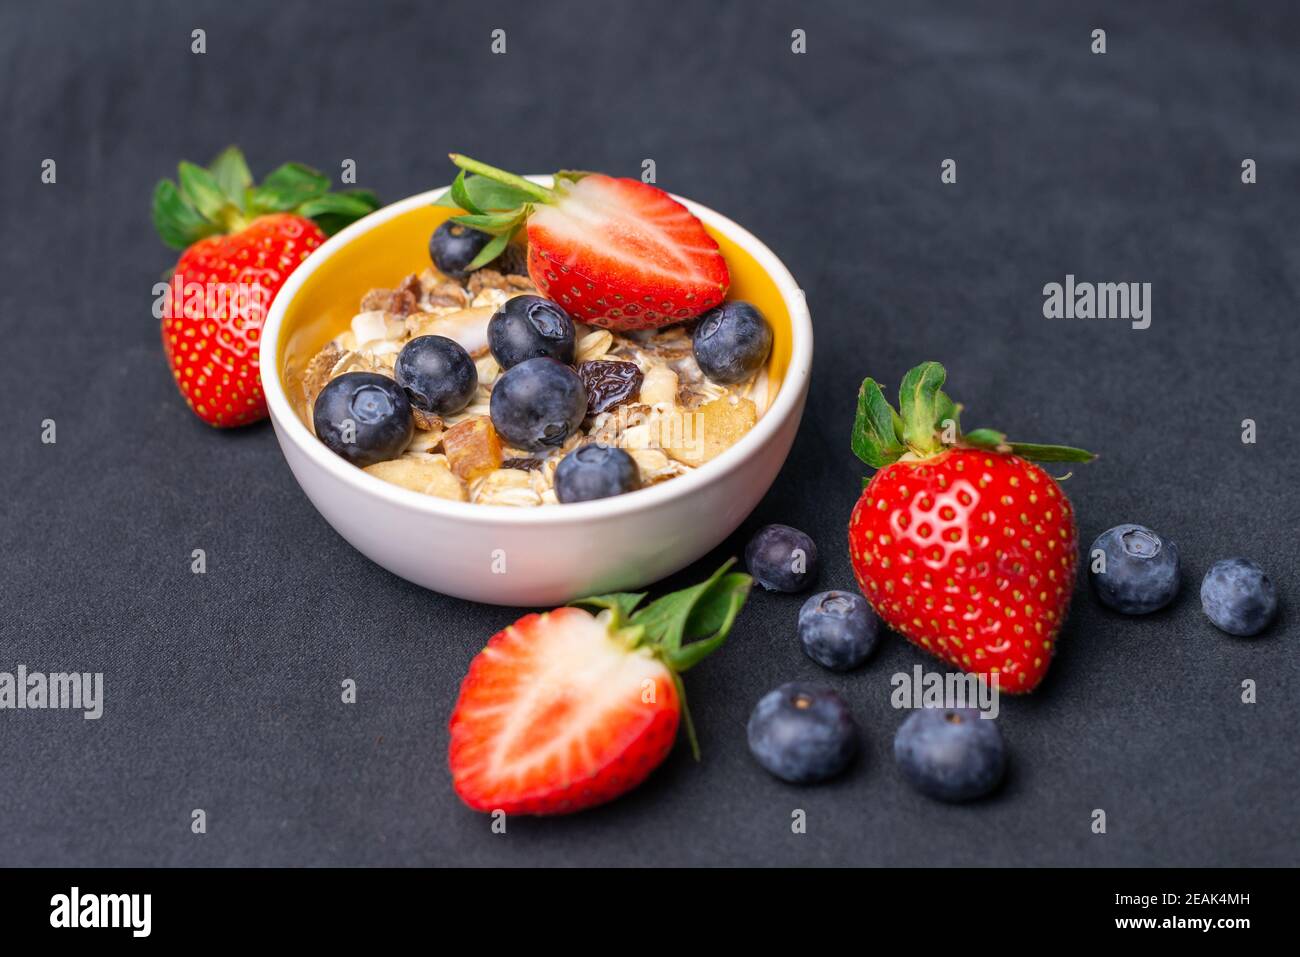 Fruit and Nut muesli with Strawberries and Blueberries. Organic Milk. Stock Photo